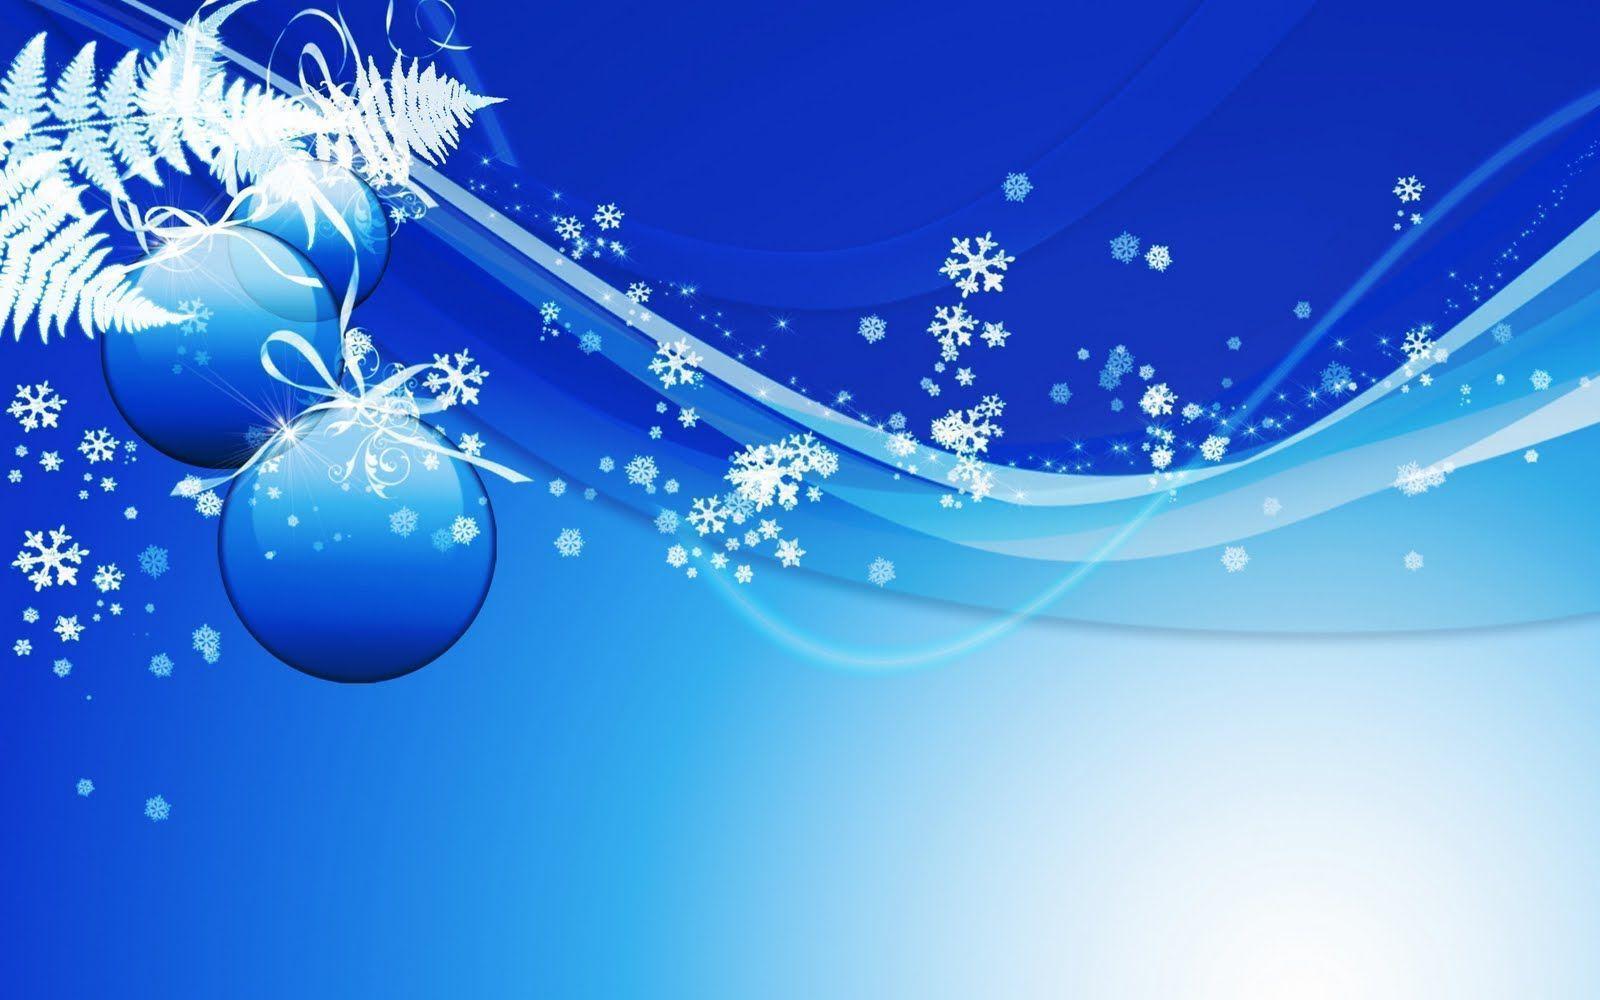 Merry Christmas 3D Background. Free Christian Wallpaper